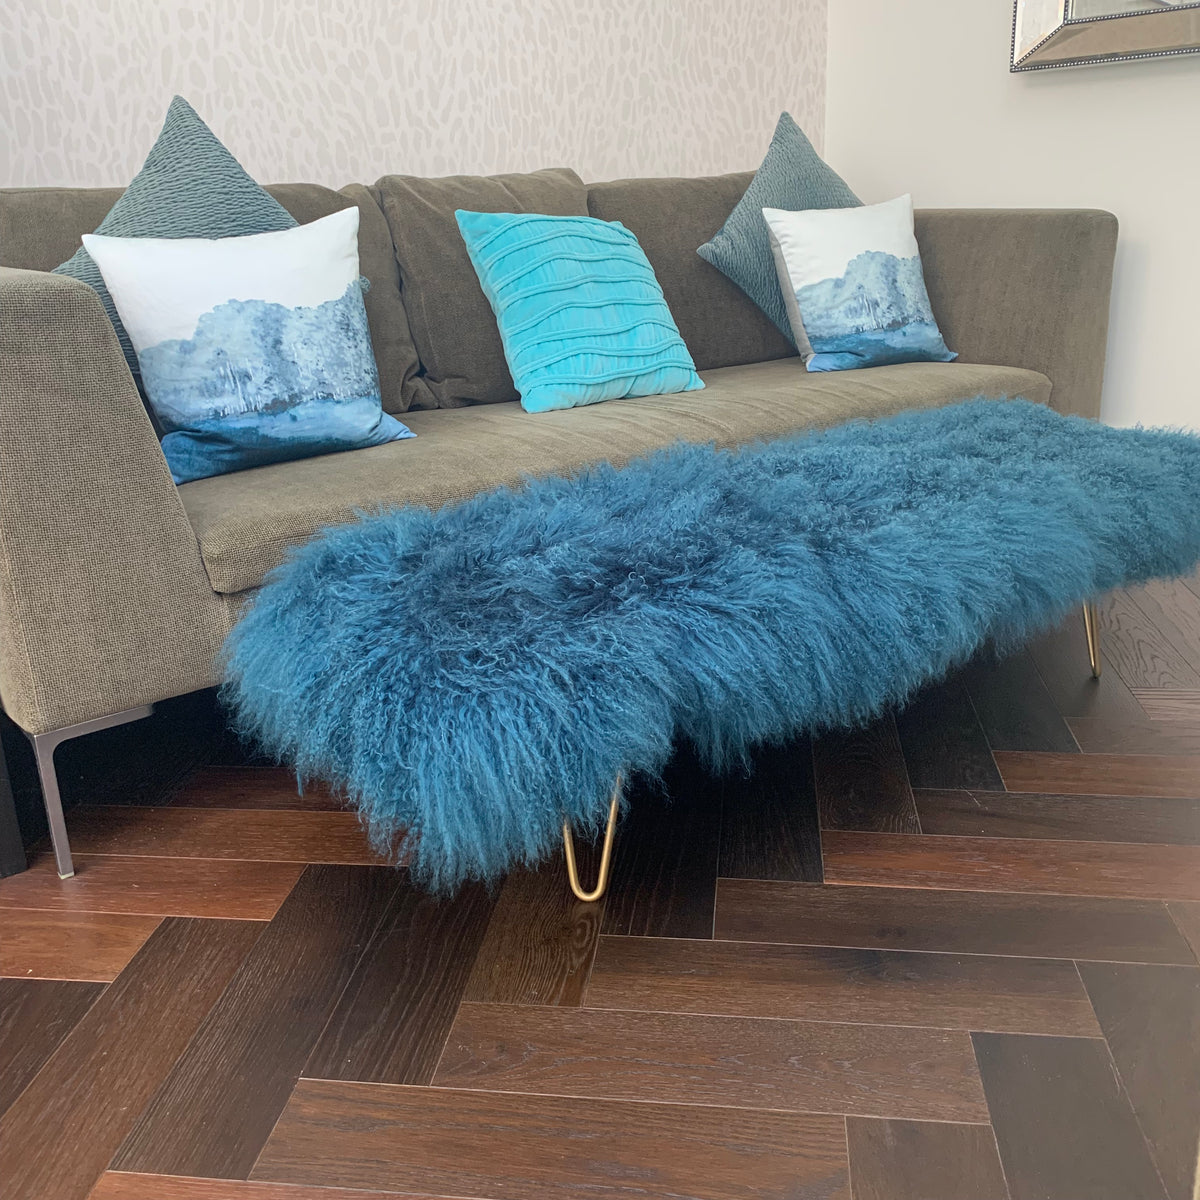 Teal turquoise mongolian sheepskin upholstered footstool with gold hairpin legs  Edit alt text